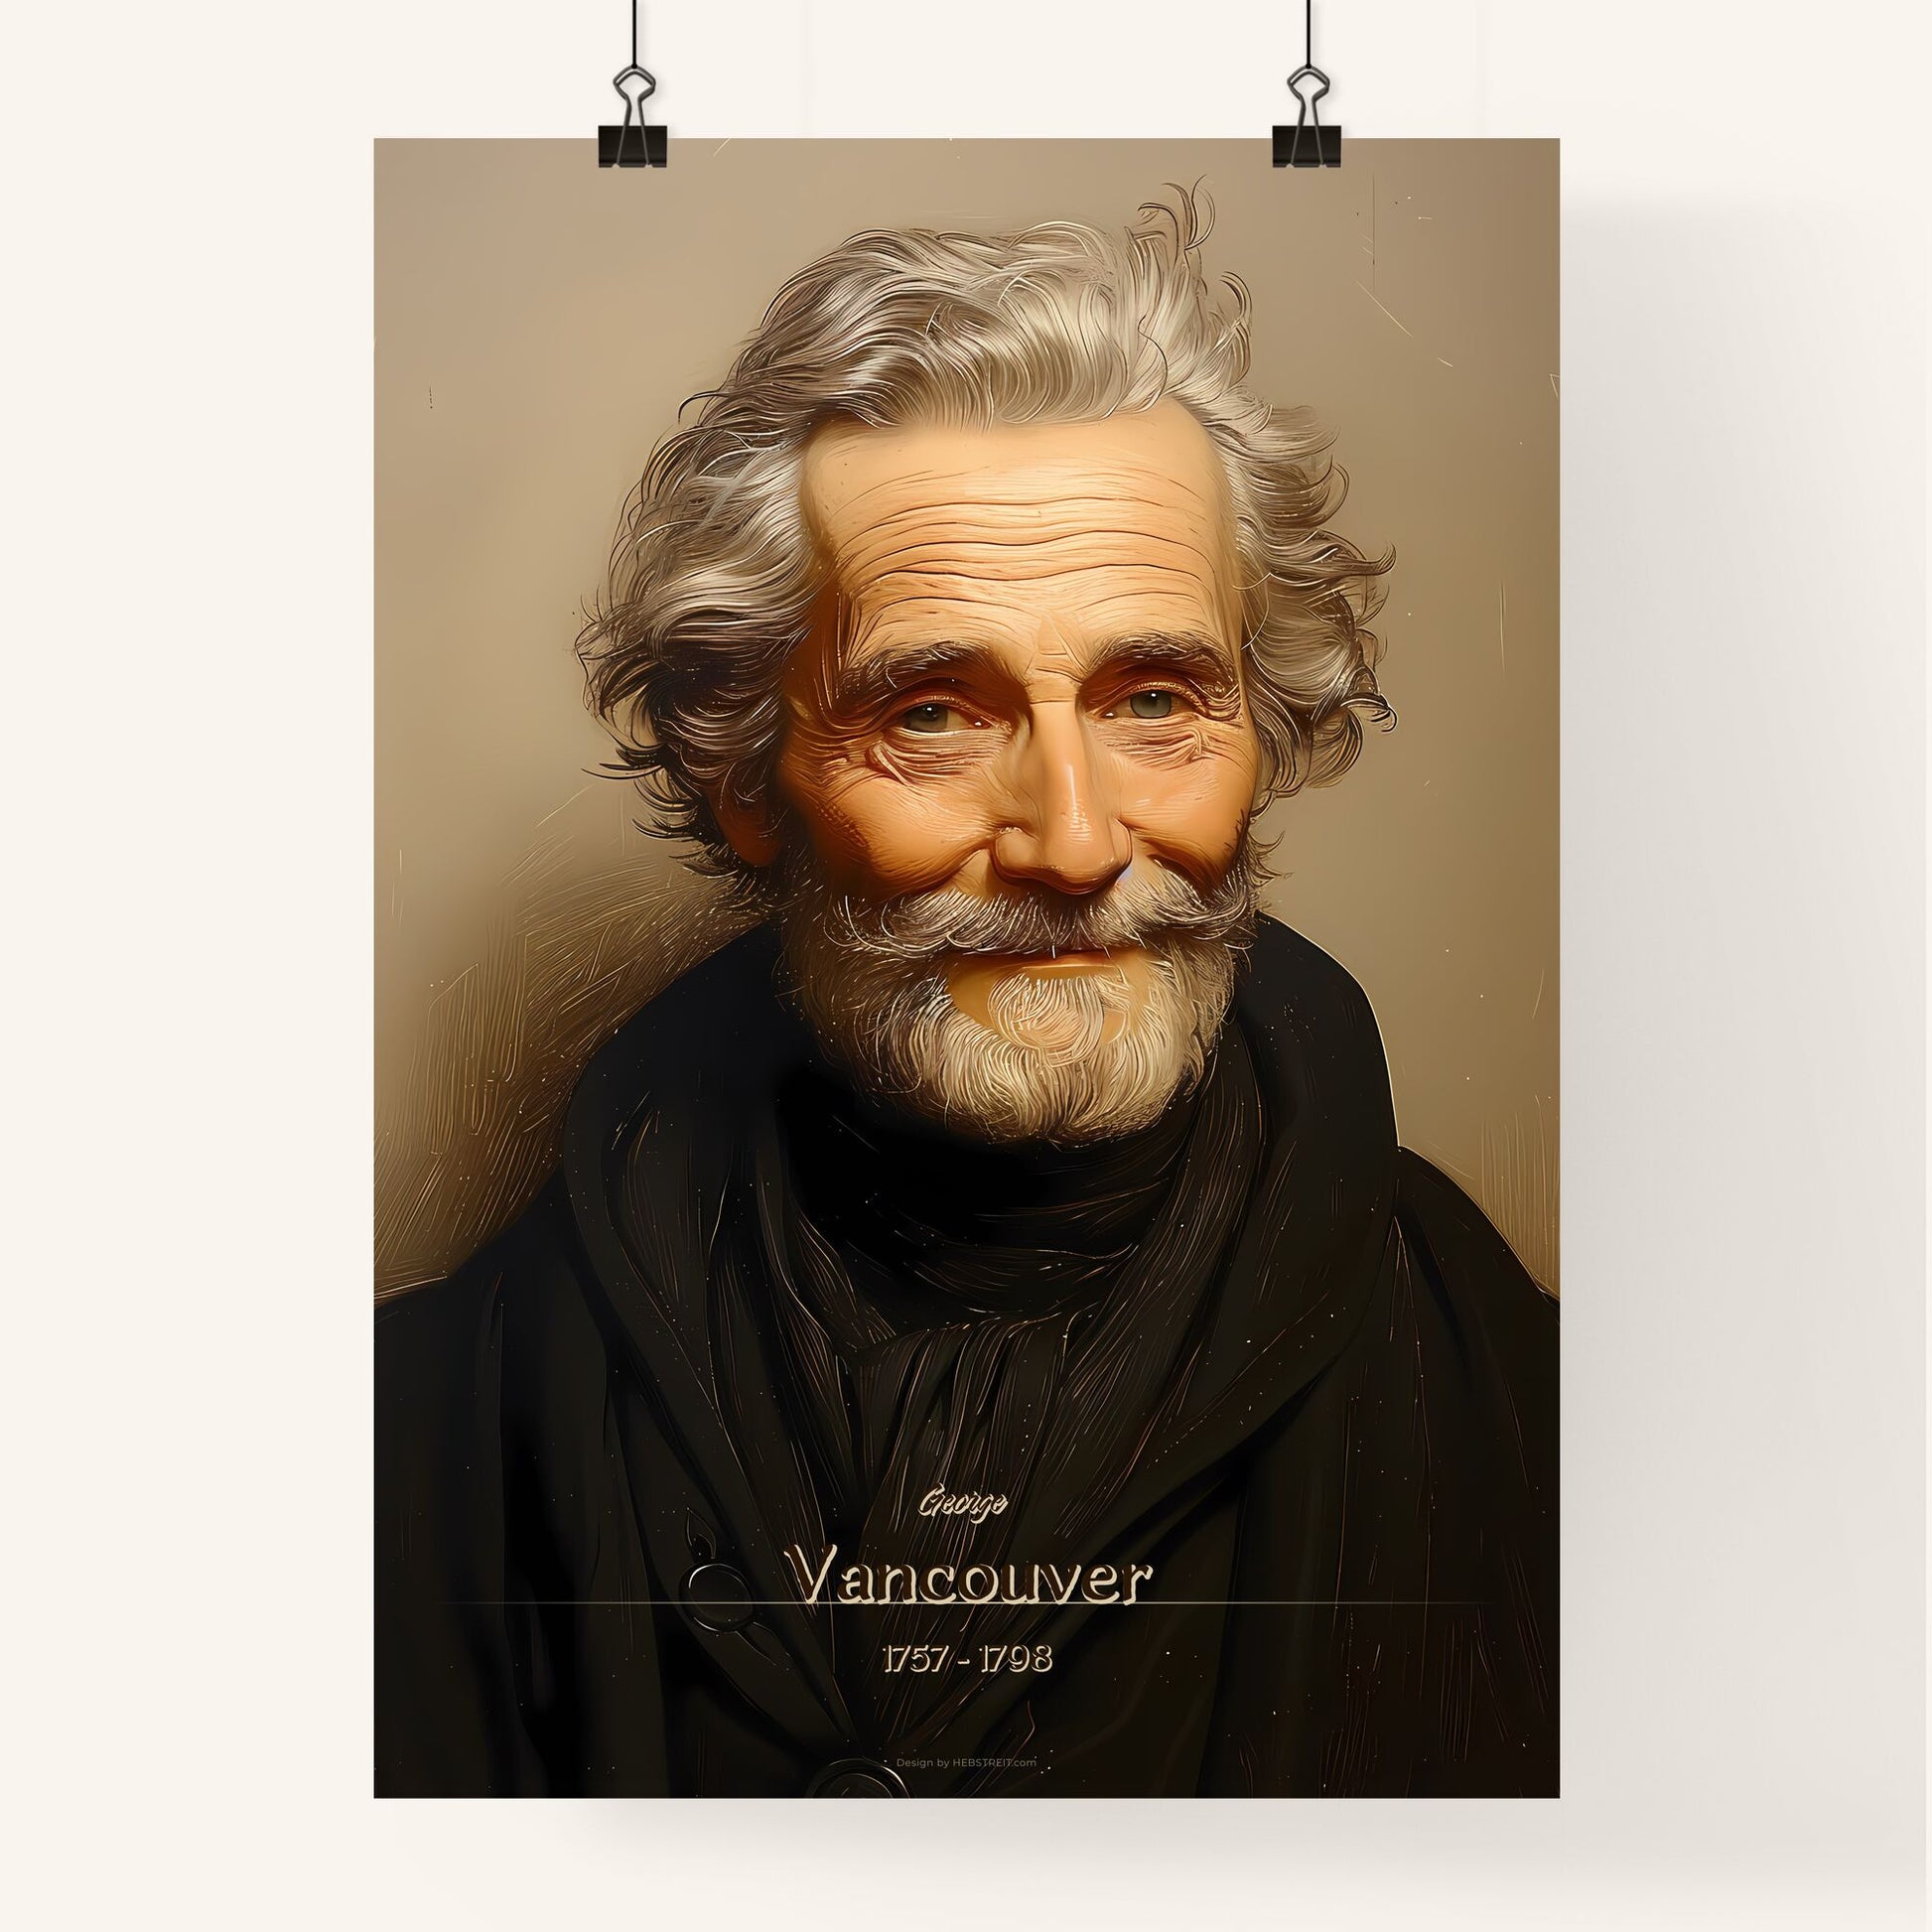 George, Vancouver, 1757 - 1798, A Poster of a man with a beard and mustache Default Title